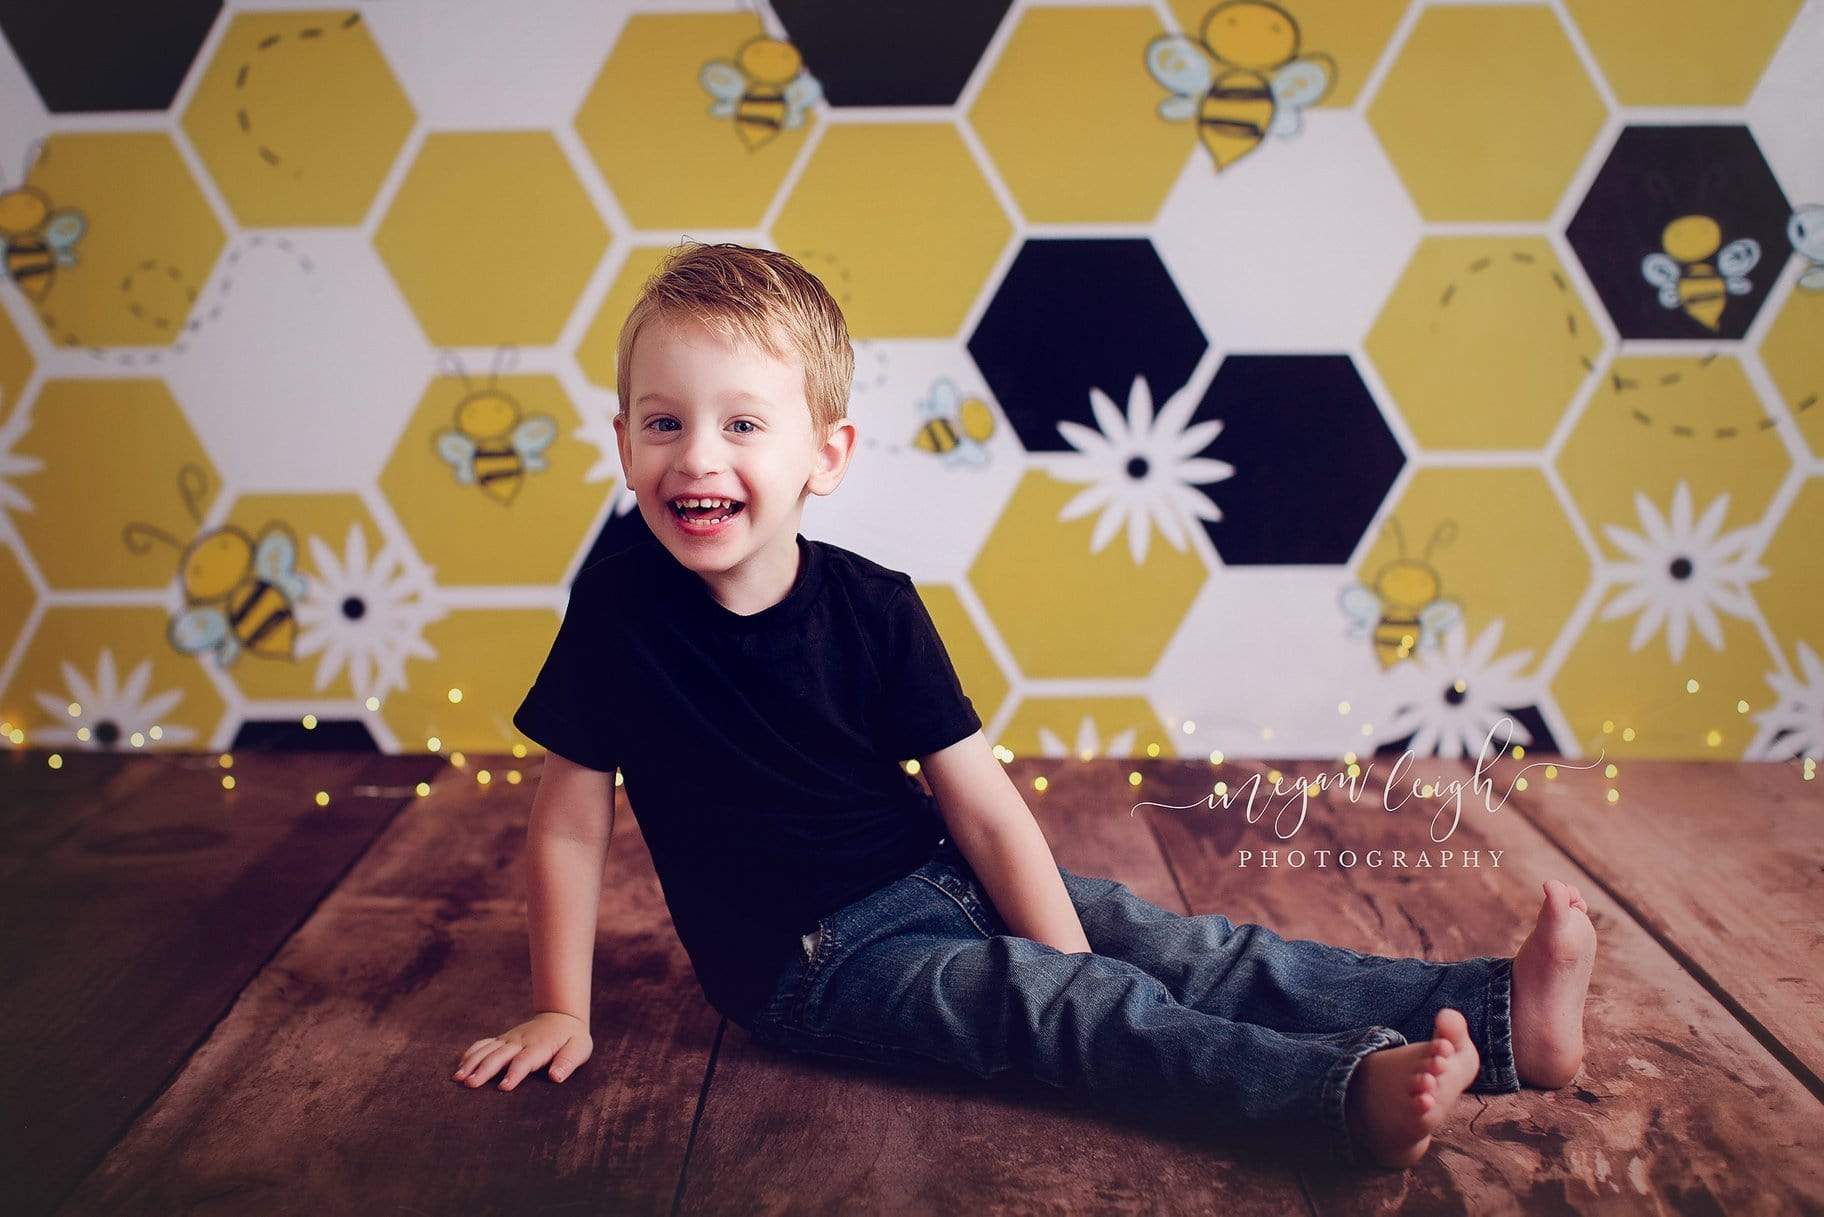 Kate Bumble Bee Summer Backdrop for Photography Designed by Megan Leigh Photography